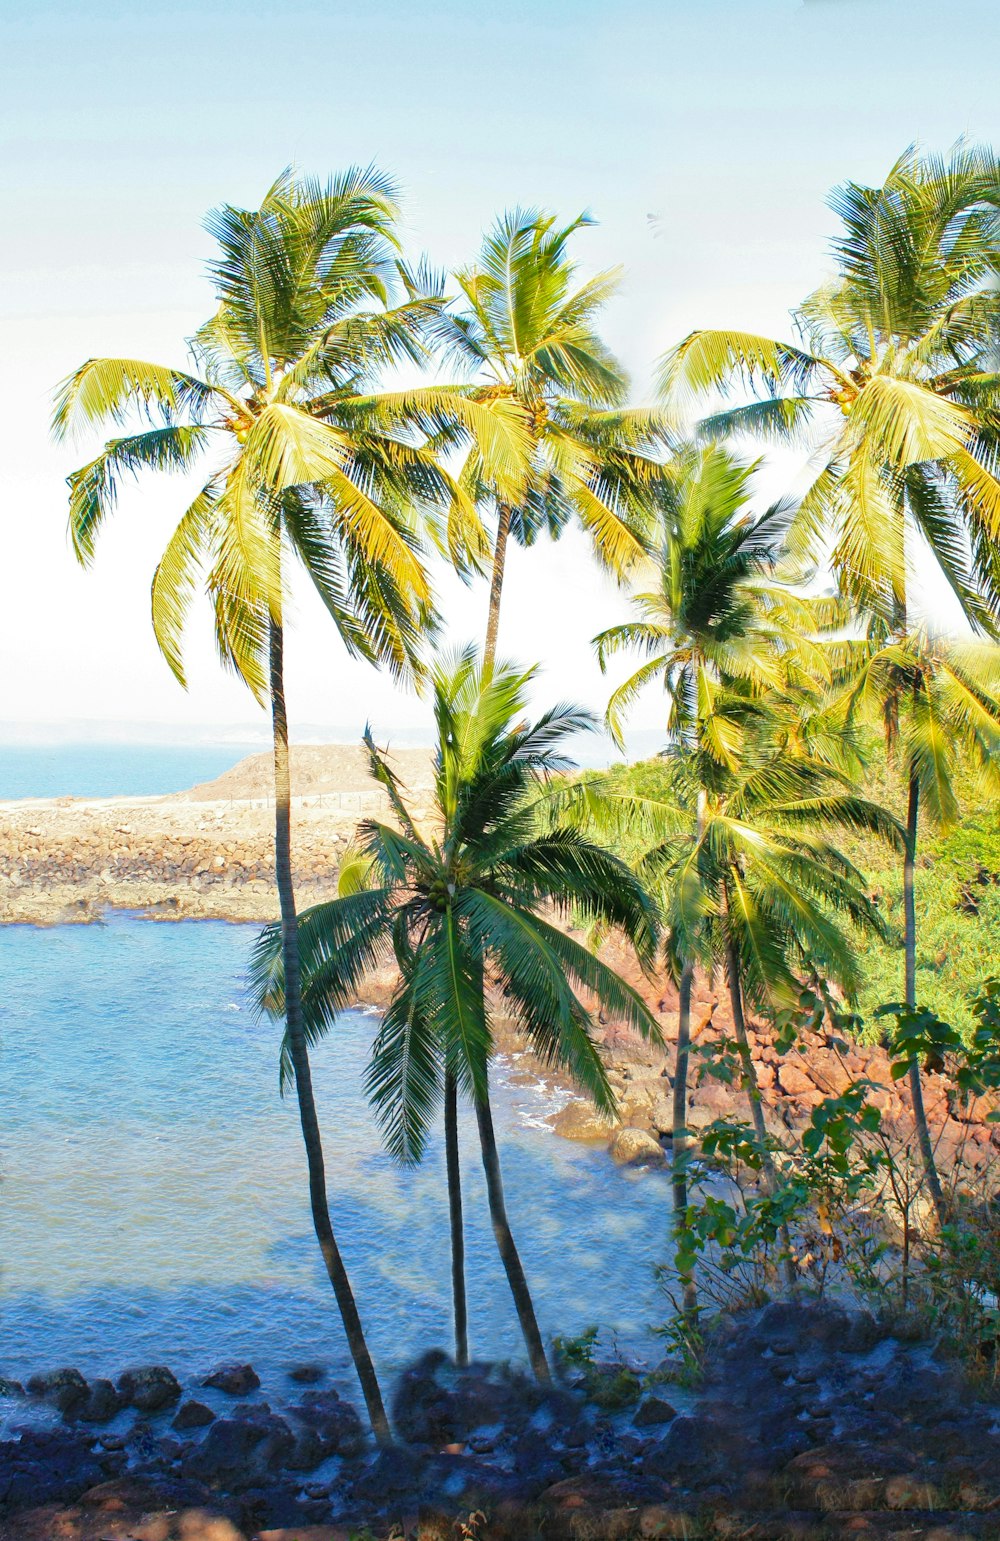 green coconut palm tree near body of water during daytime